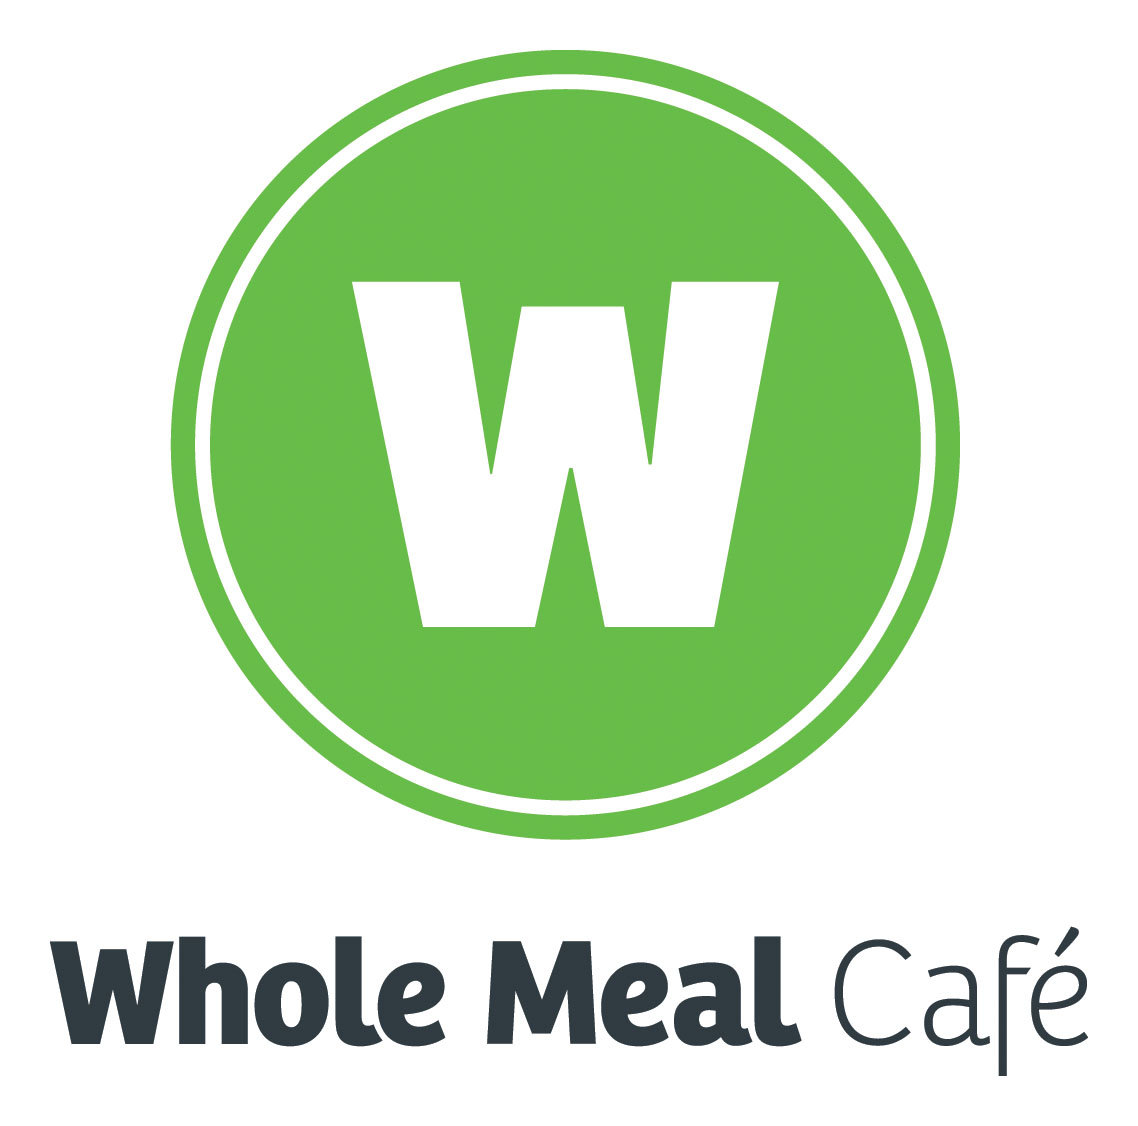 Whole Meal Cafe